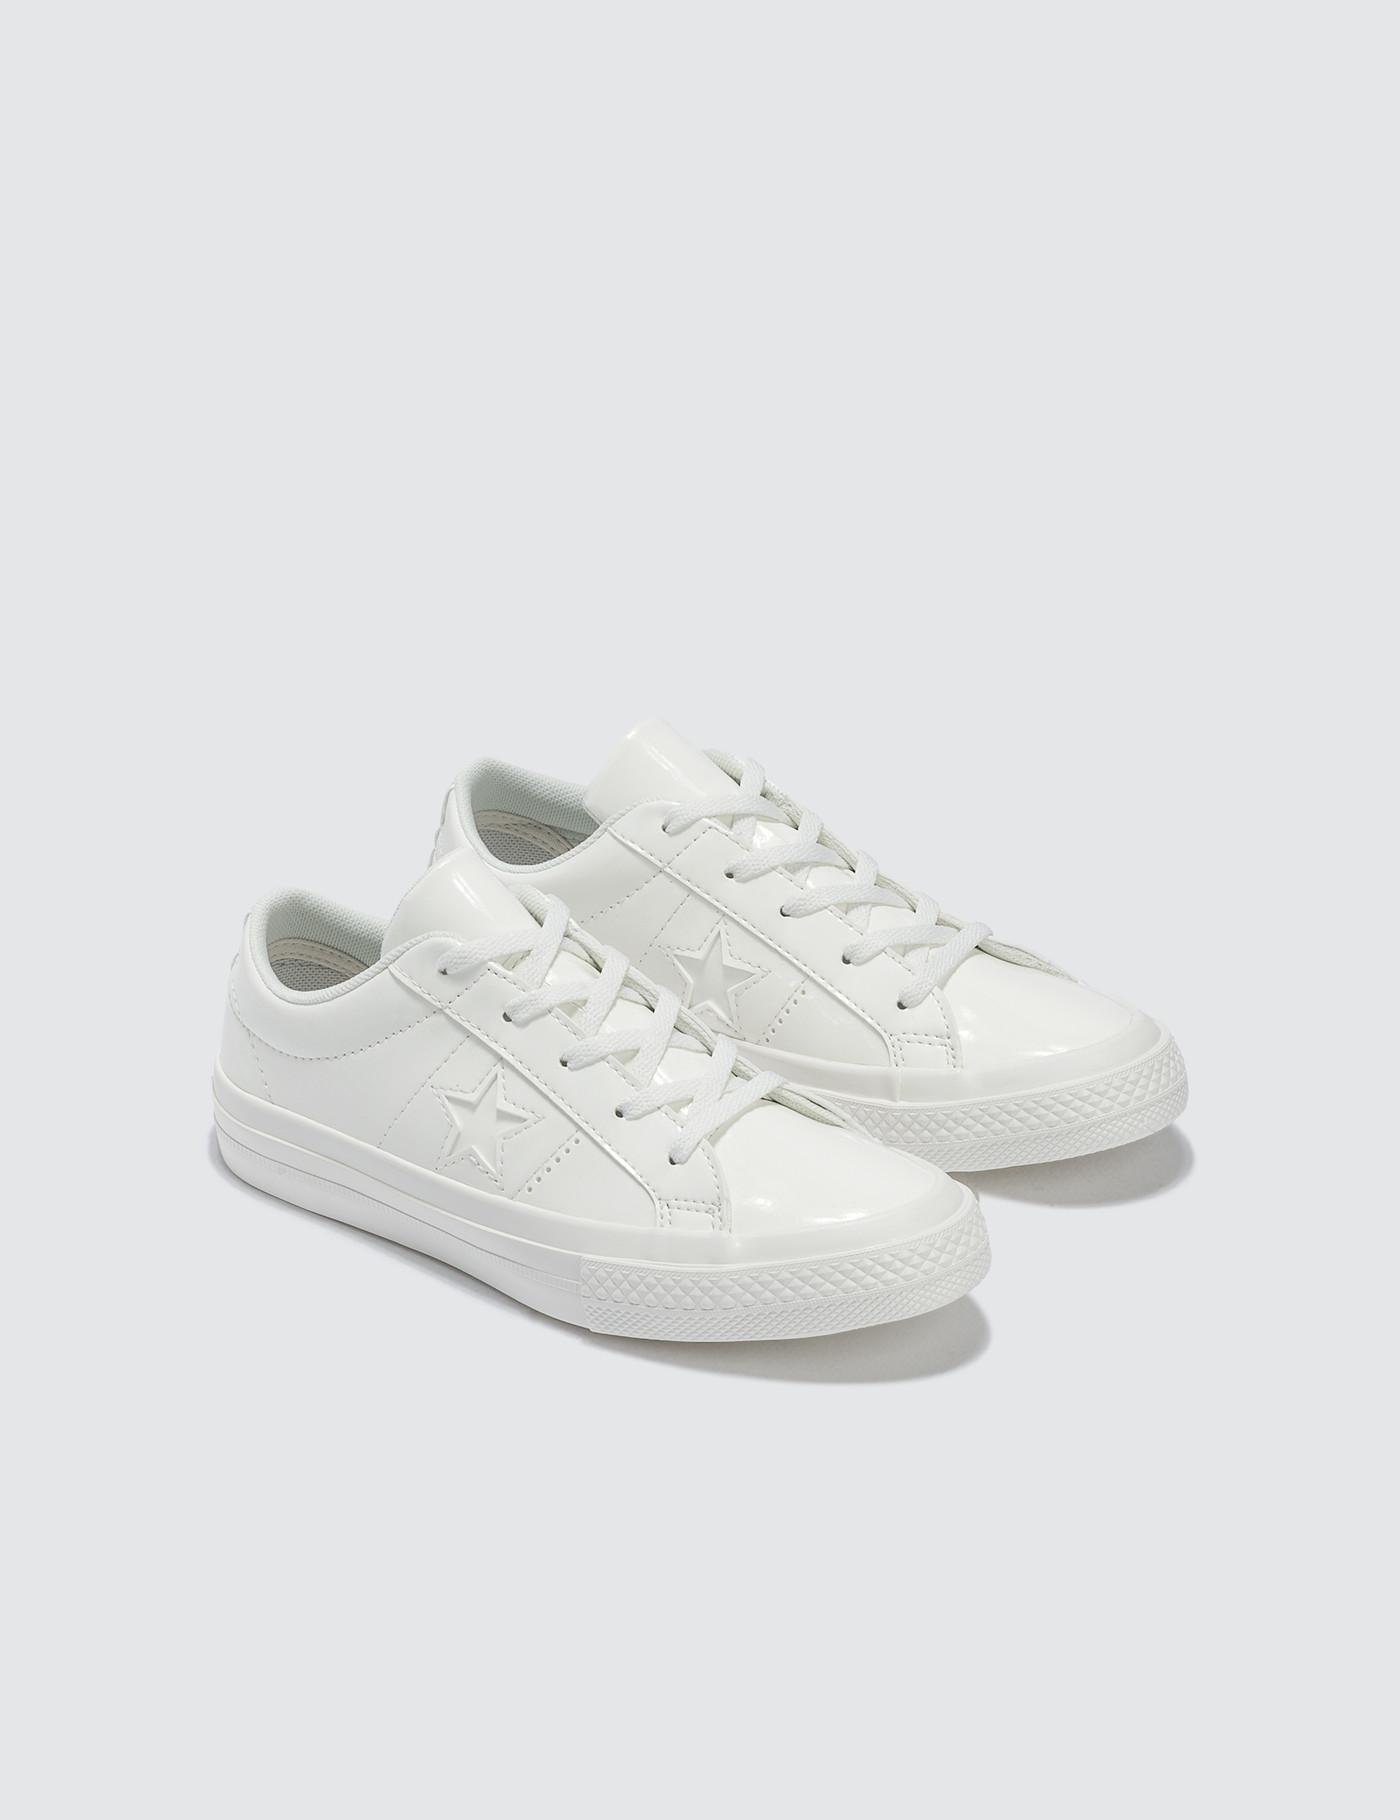 converse one star youth